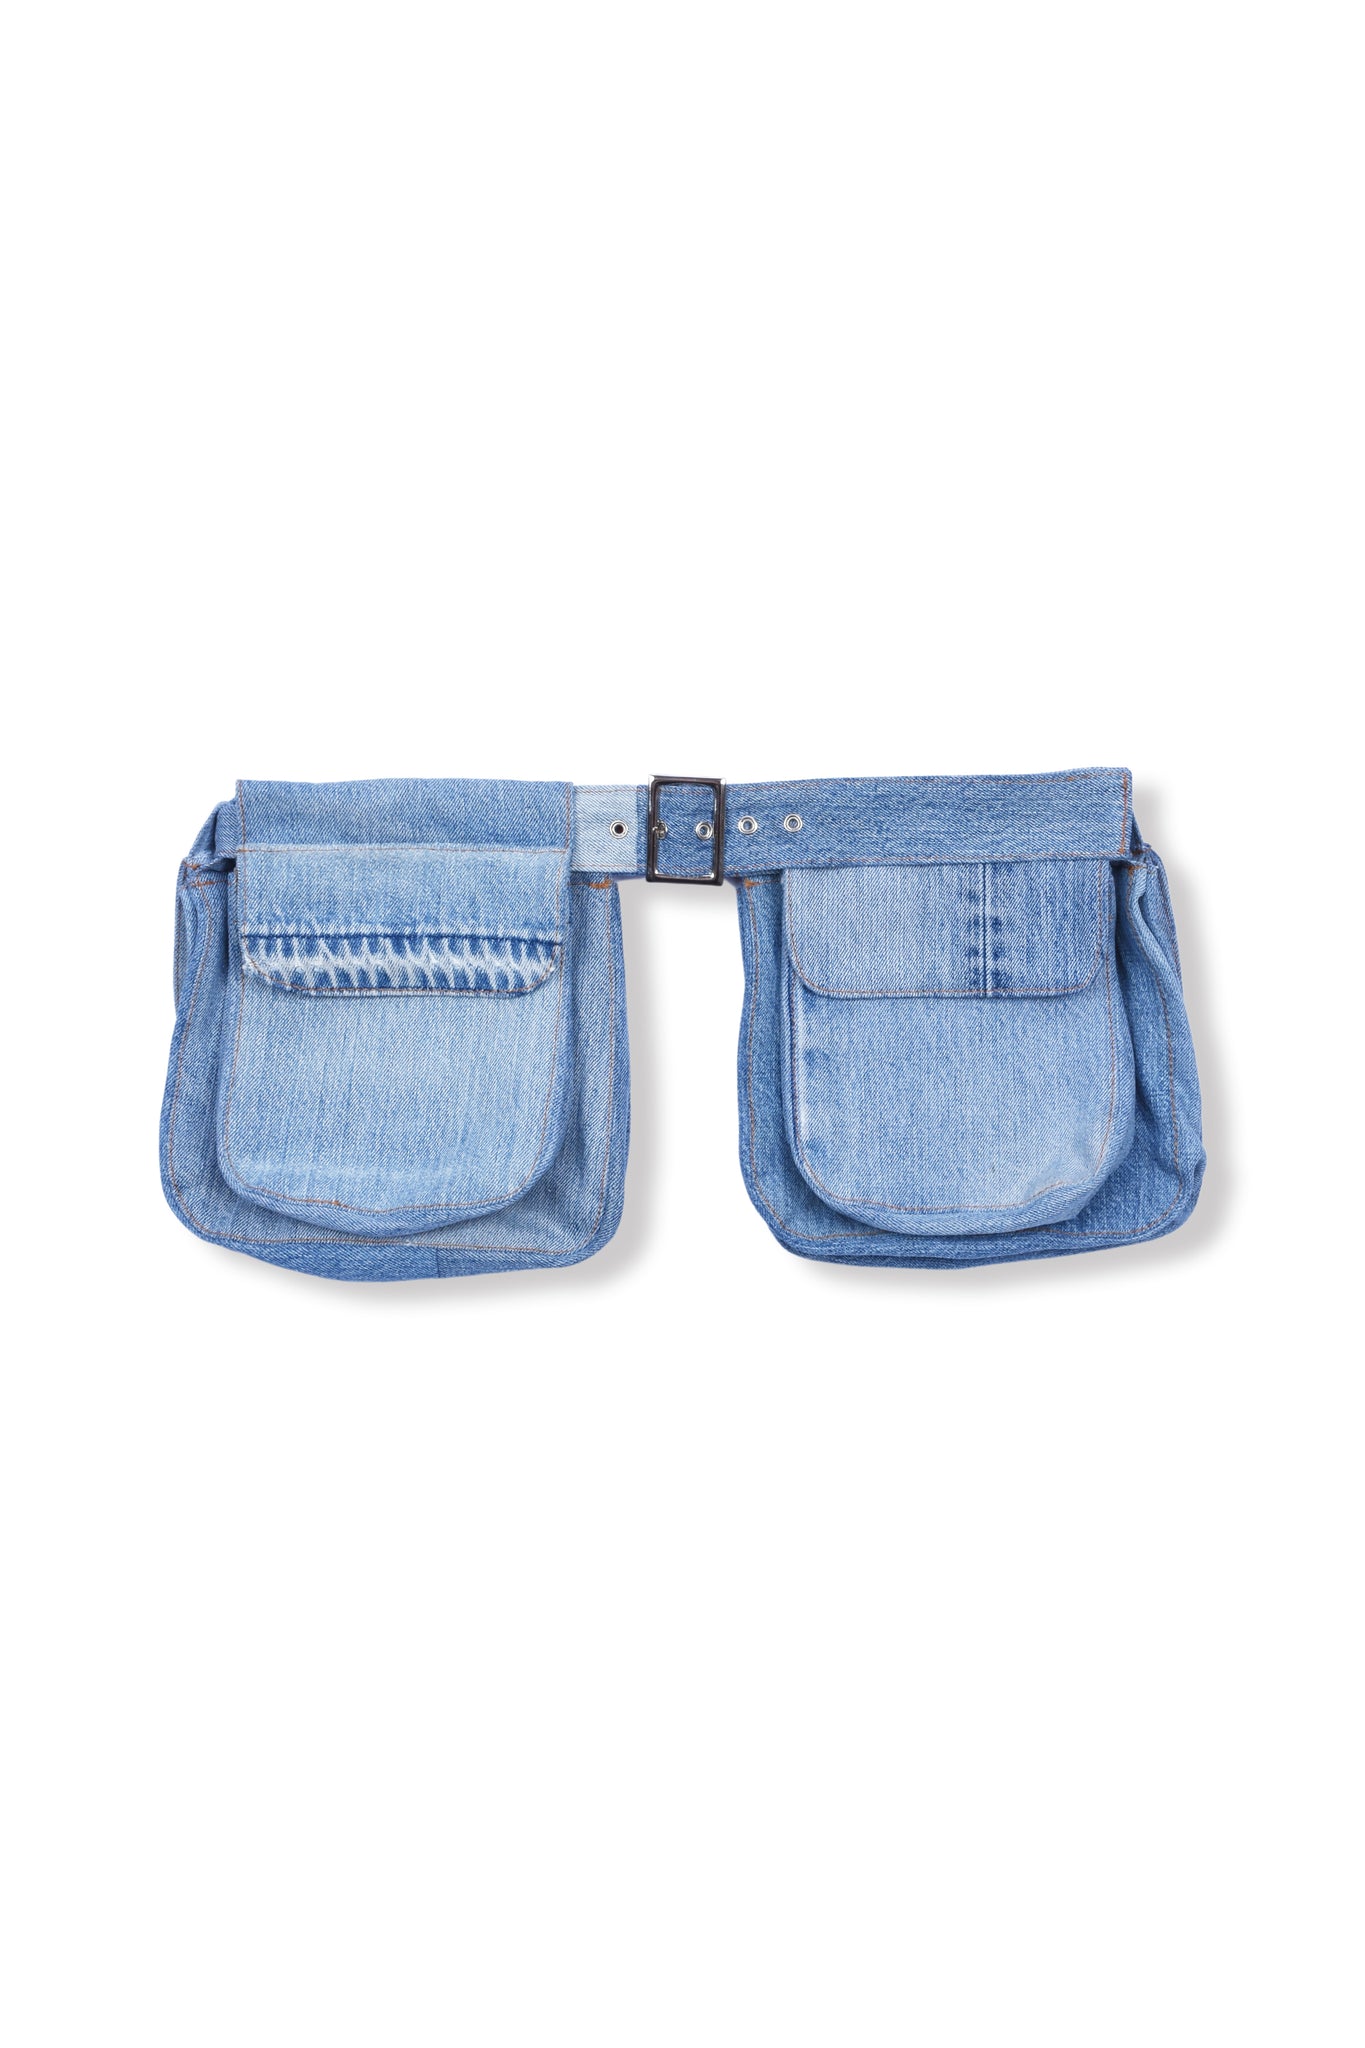 ONE-OFF PATCHWORKED DENIM WEST BAG